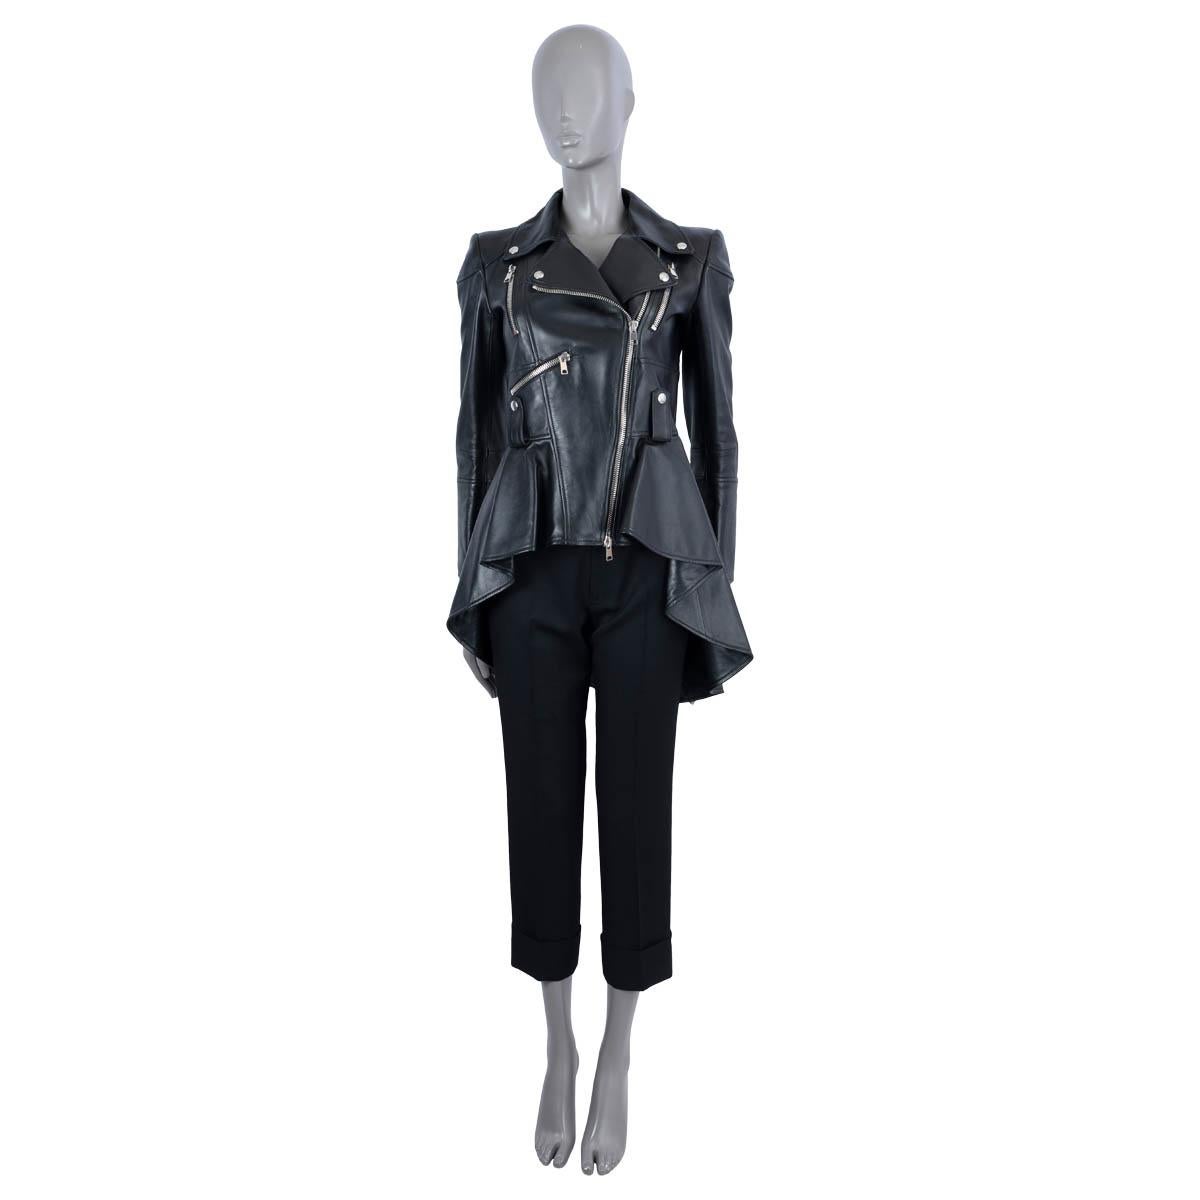 100% authentic Alexander McQueen peplum biker jacket in black leather (100%). Features with zippers at the cuffs, three zip pockets at the front and loop belts. Opens with a silver metal zipper on the front. Lined in black silk (100%). Has been worn